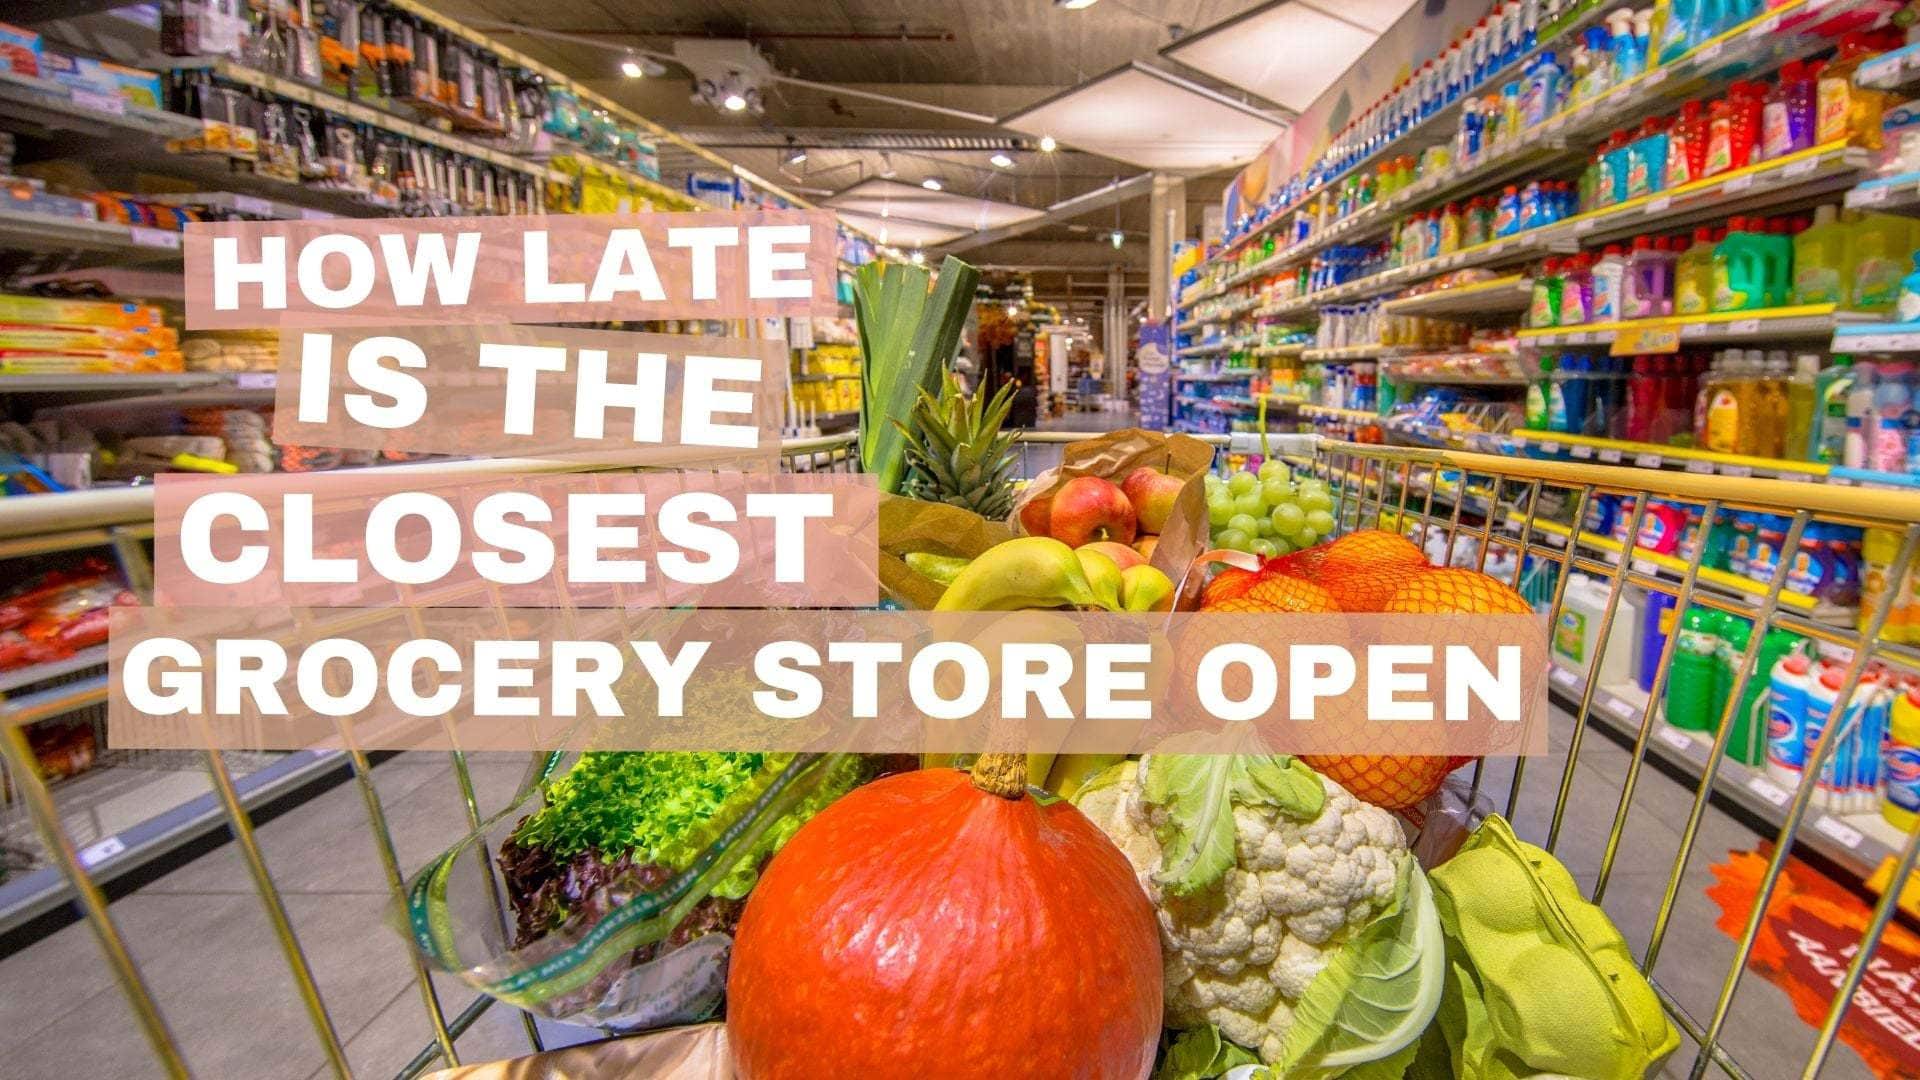 Near market. How late is the closest grocery Store open?. Open Store. Supermarket open hours. British grocery Stores close.